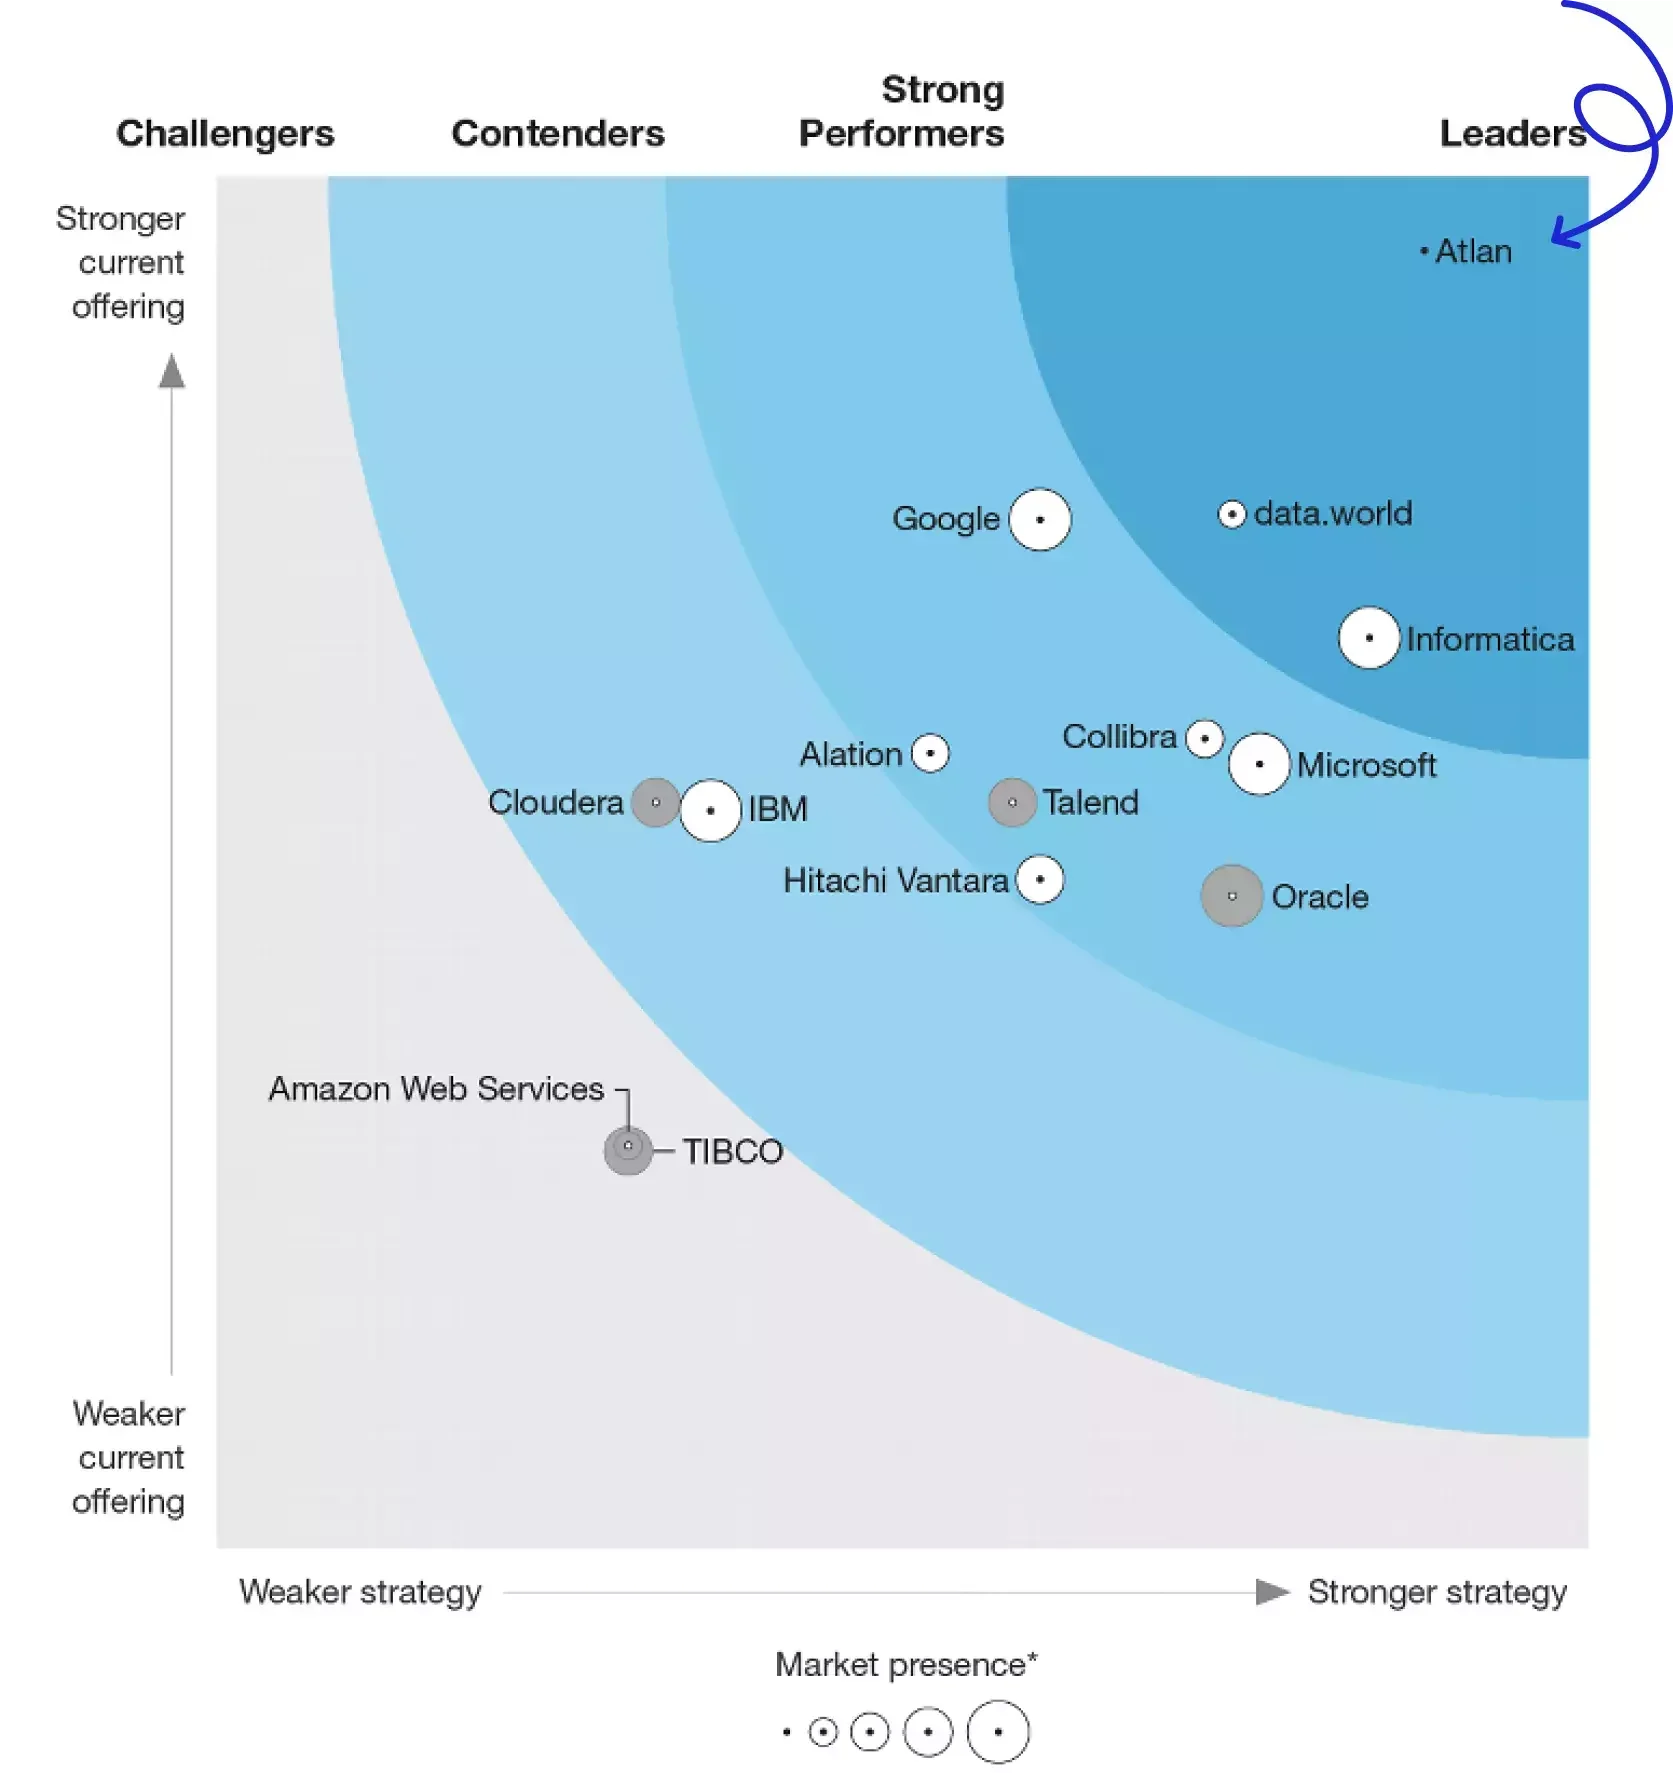 The latest Forrester Wave Report ranks Atlan as the best data catalog solution.